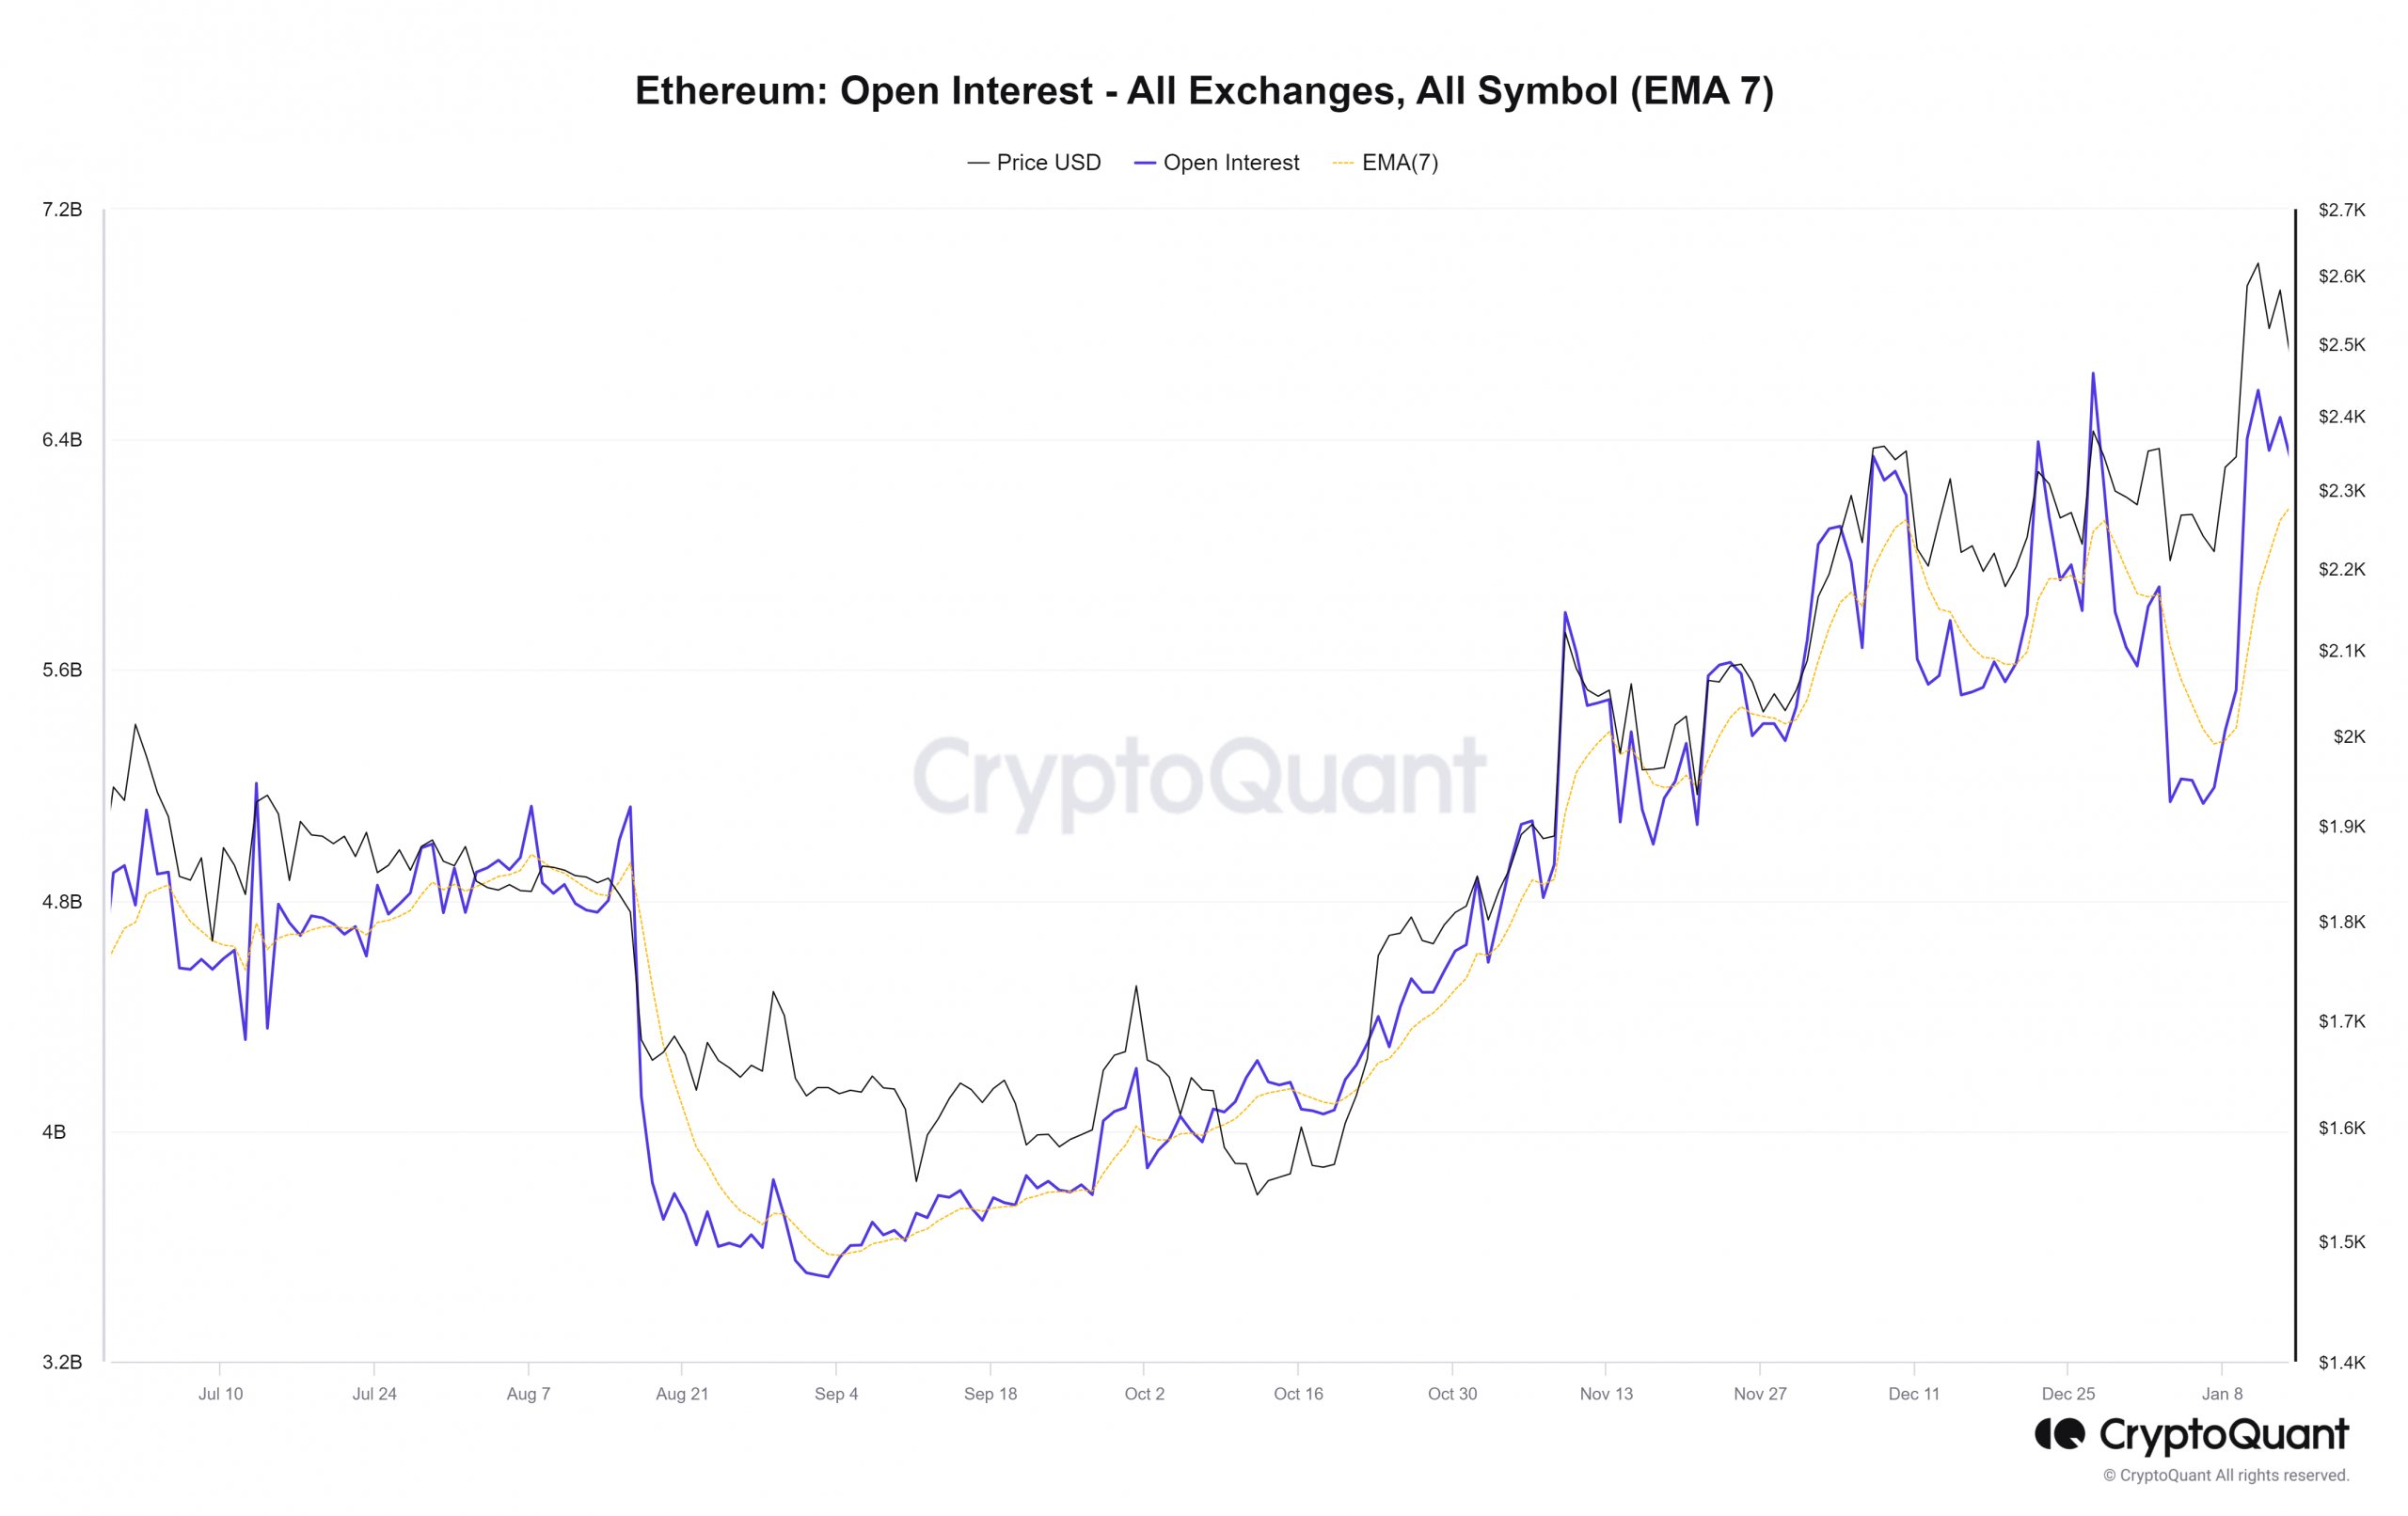 Ethereum witnesses lowered leverage ratio over the past month, here's what that means